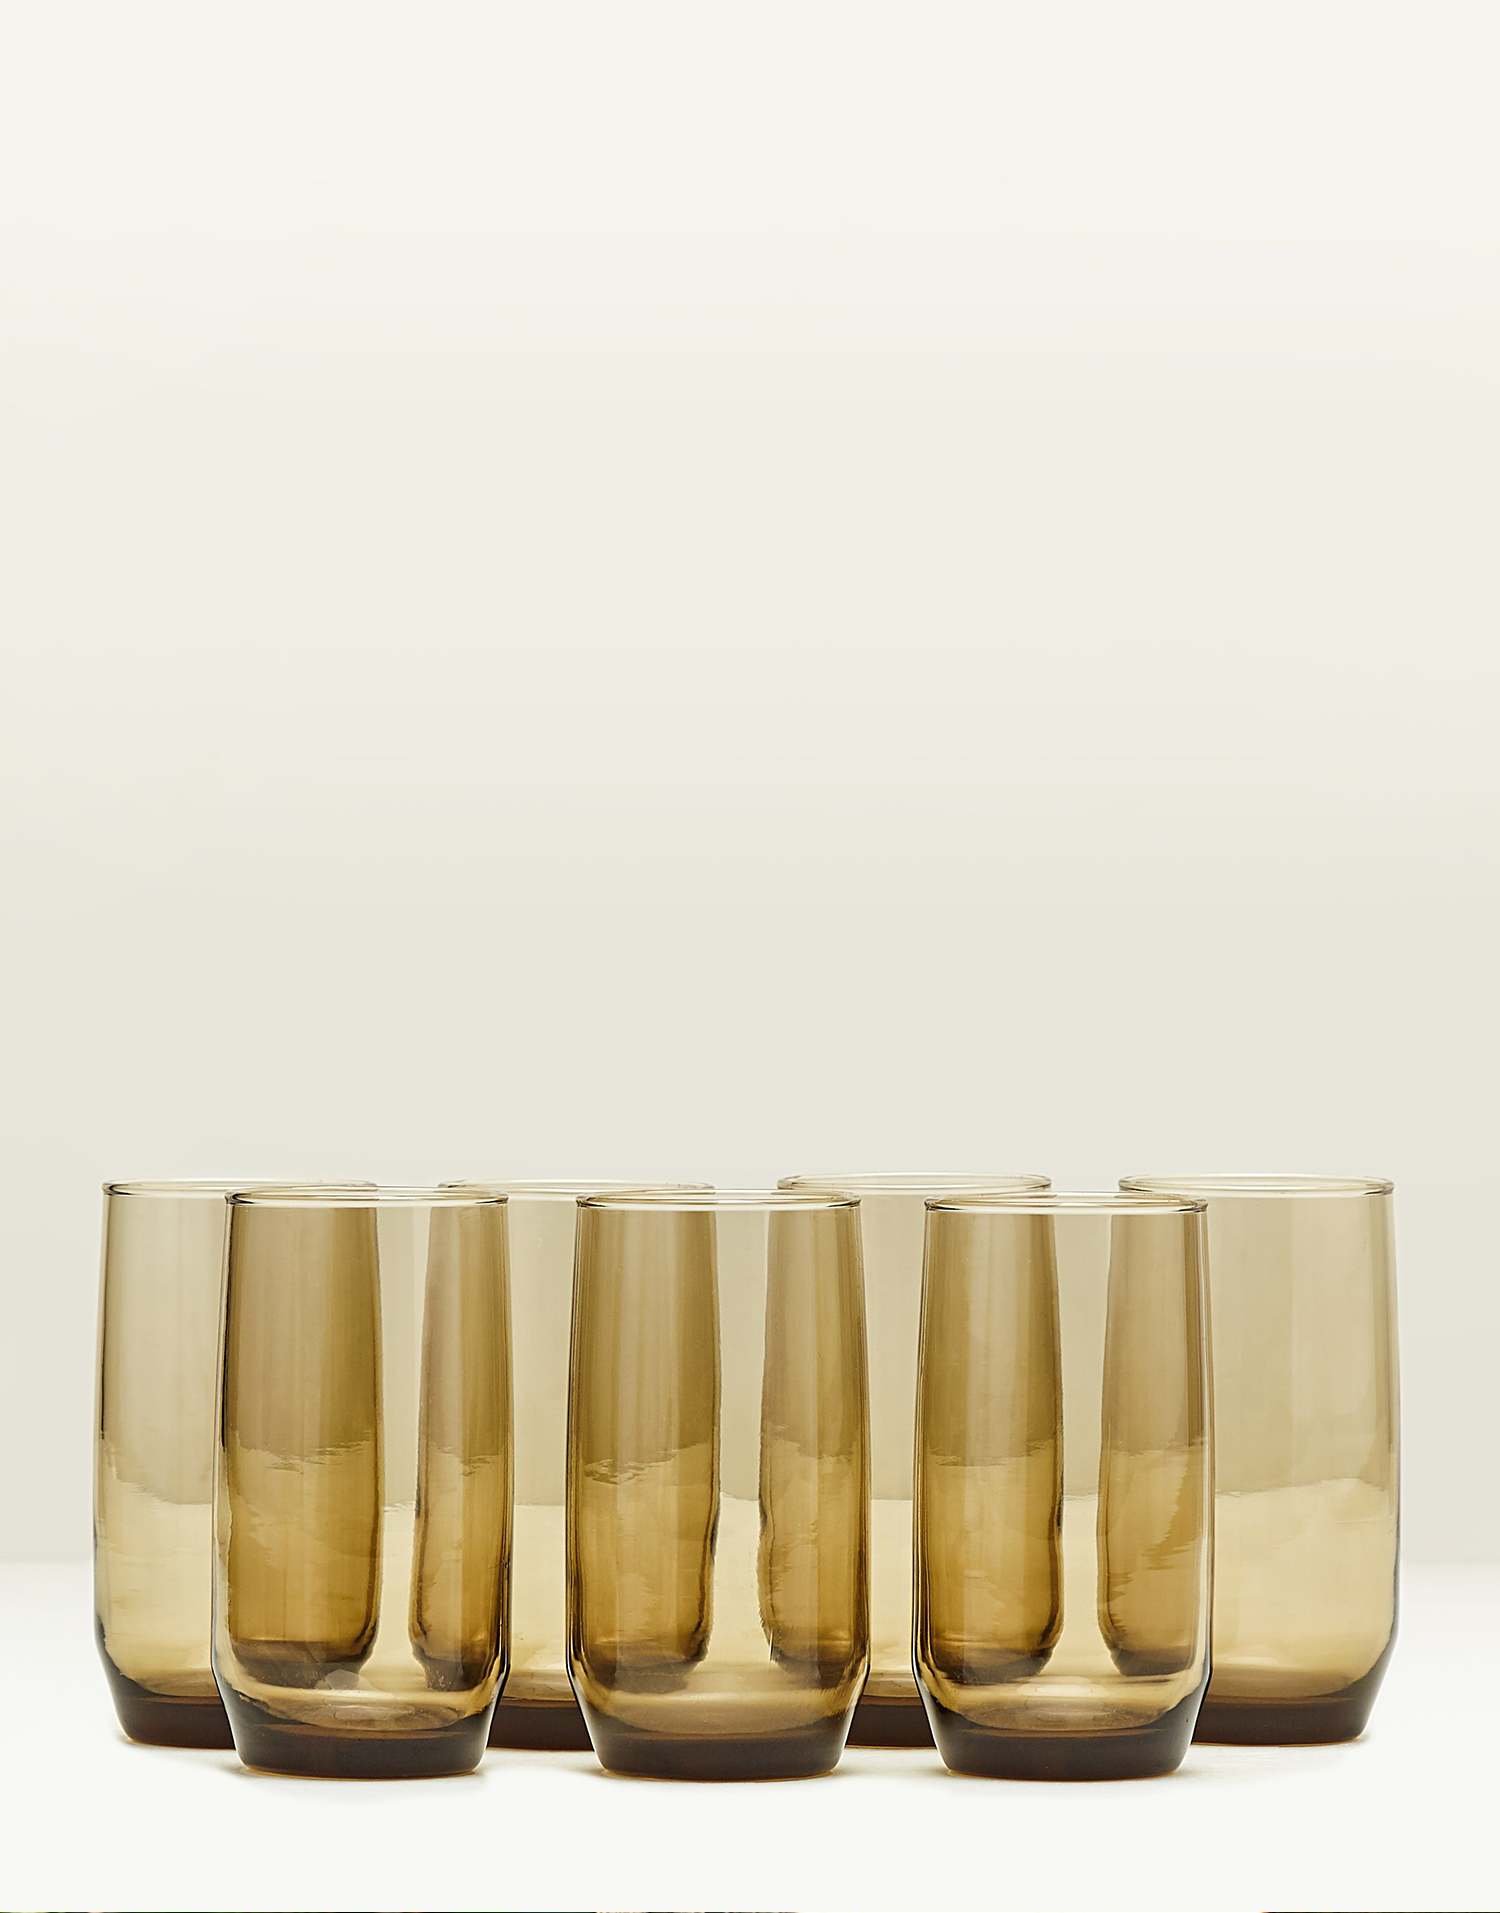 Vintage Amber Libby Water Glasses (Set of 7)